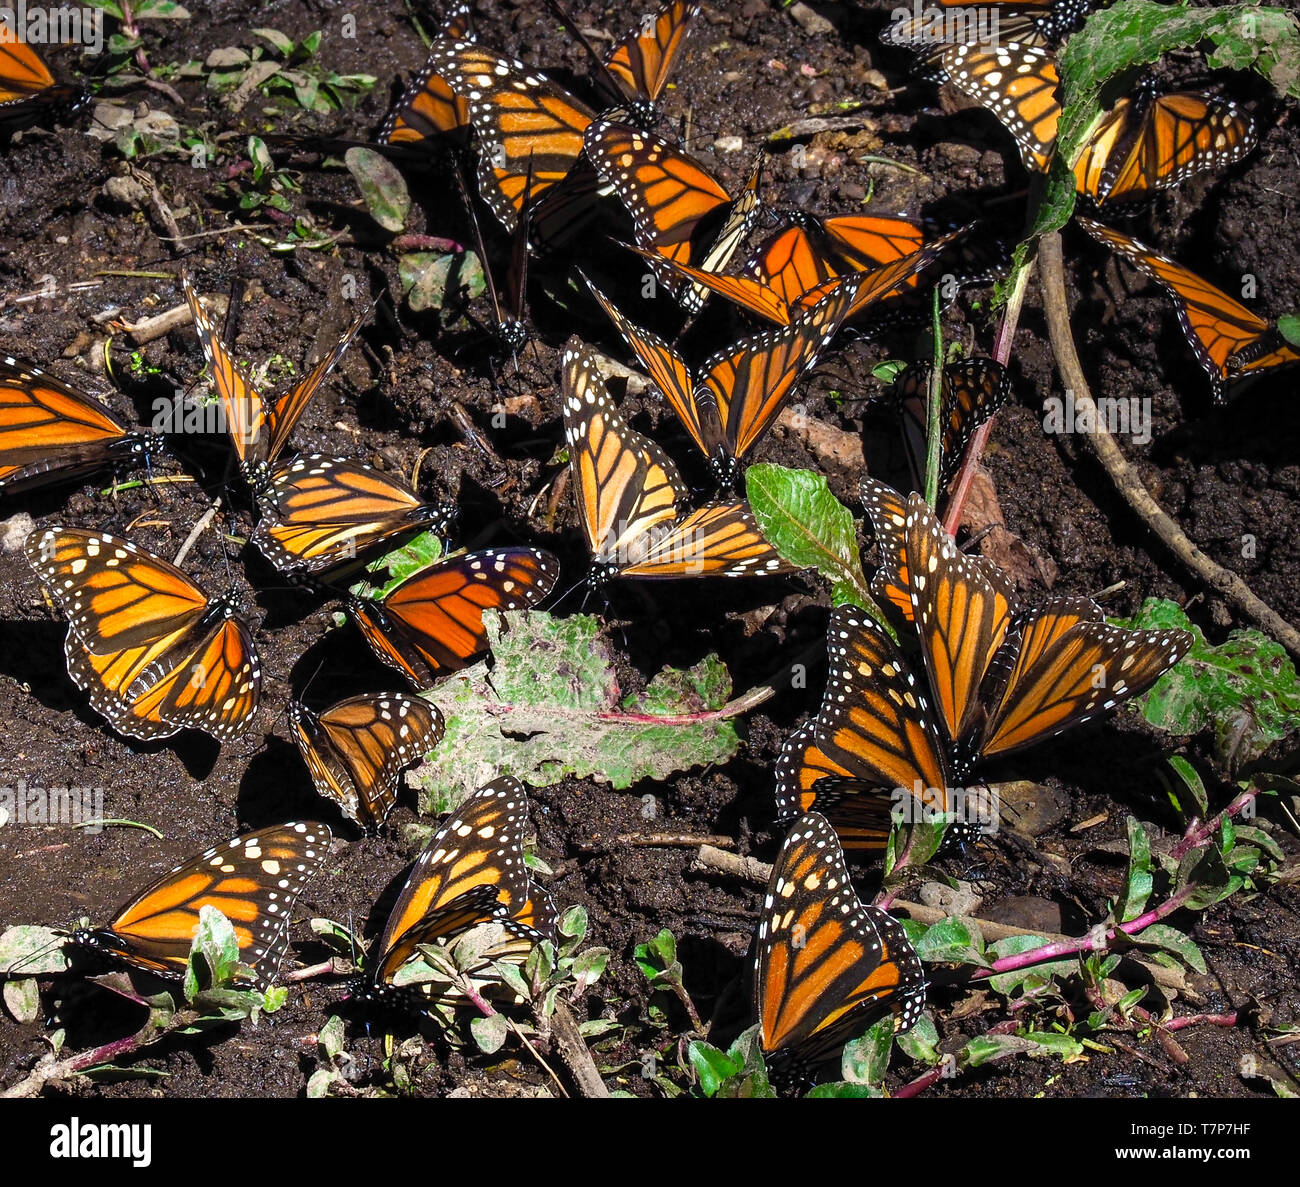 Monarch butterflies. El Rosario Monarch Butterfly Preserve, Mexico. The butterflies migrate yearly from Mexico til USA through four generations Stock Photo